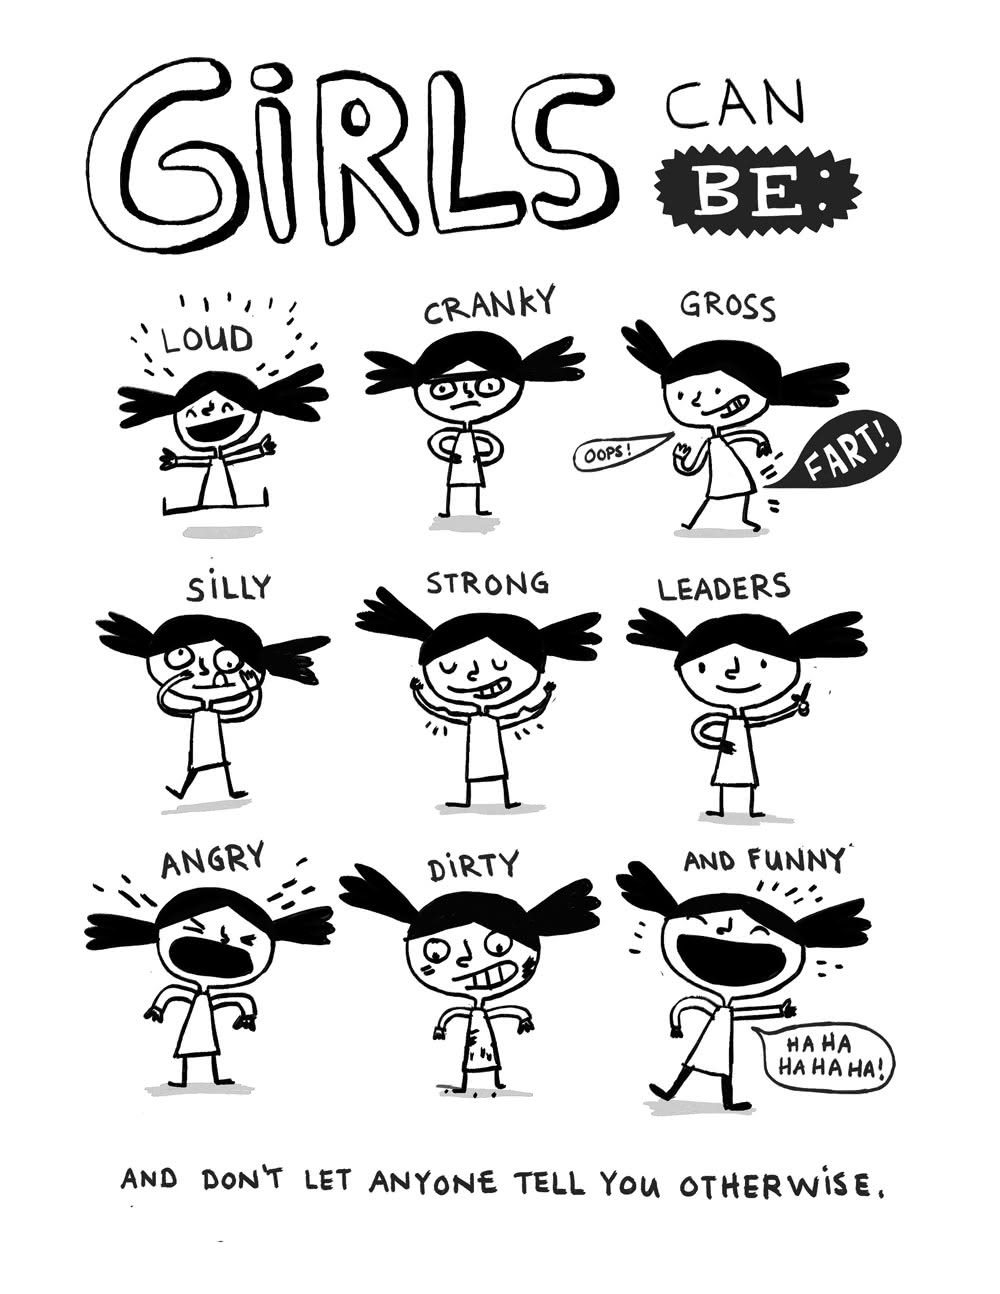 Girls can be